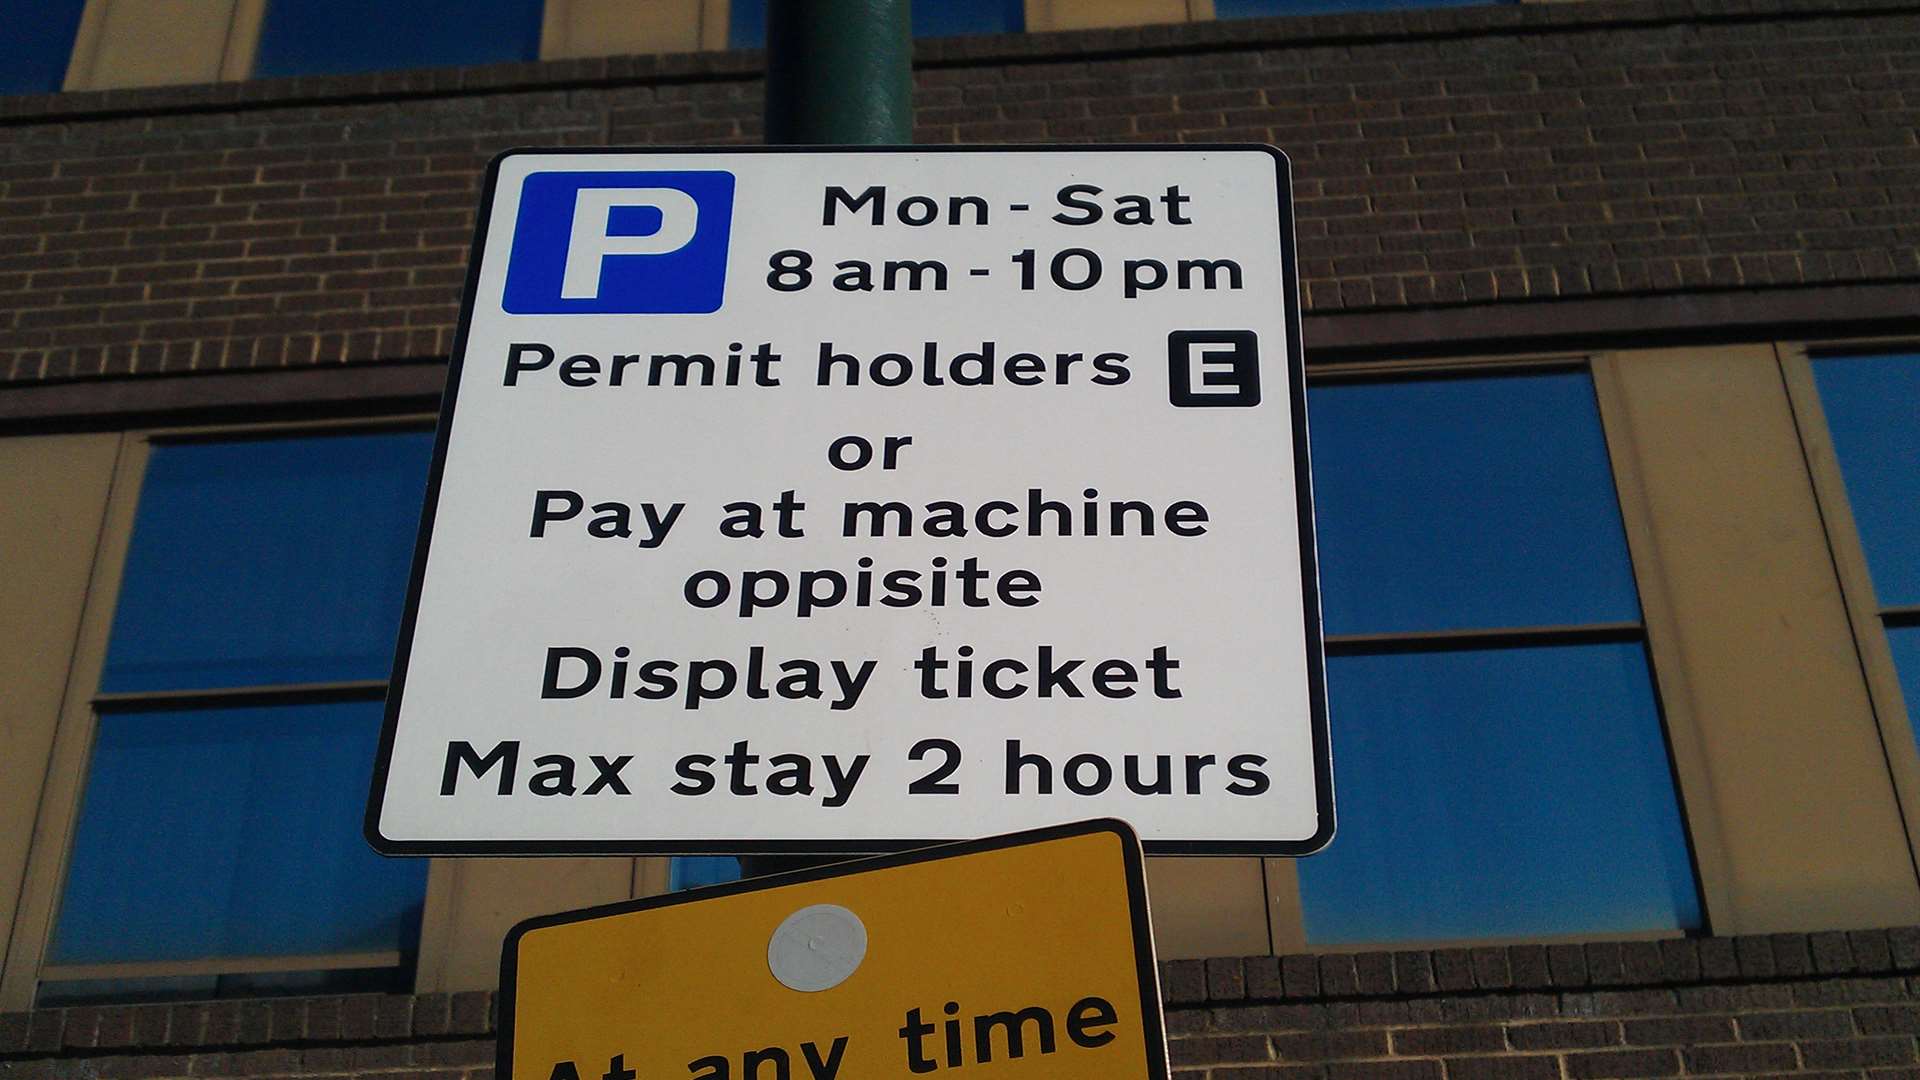 A fine mess! The parking sign is opposite of the correct spelling! Picture: Trevor Youens